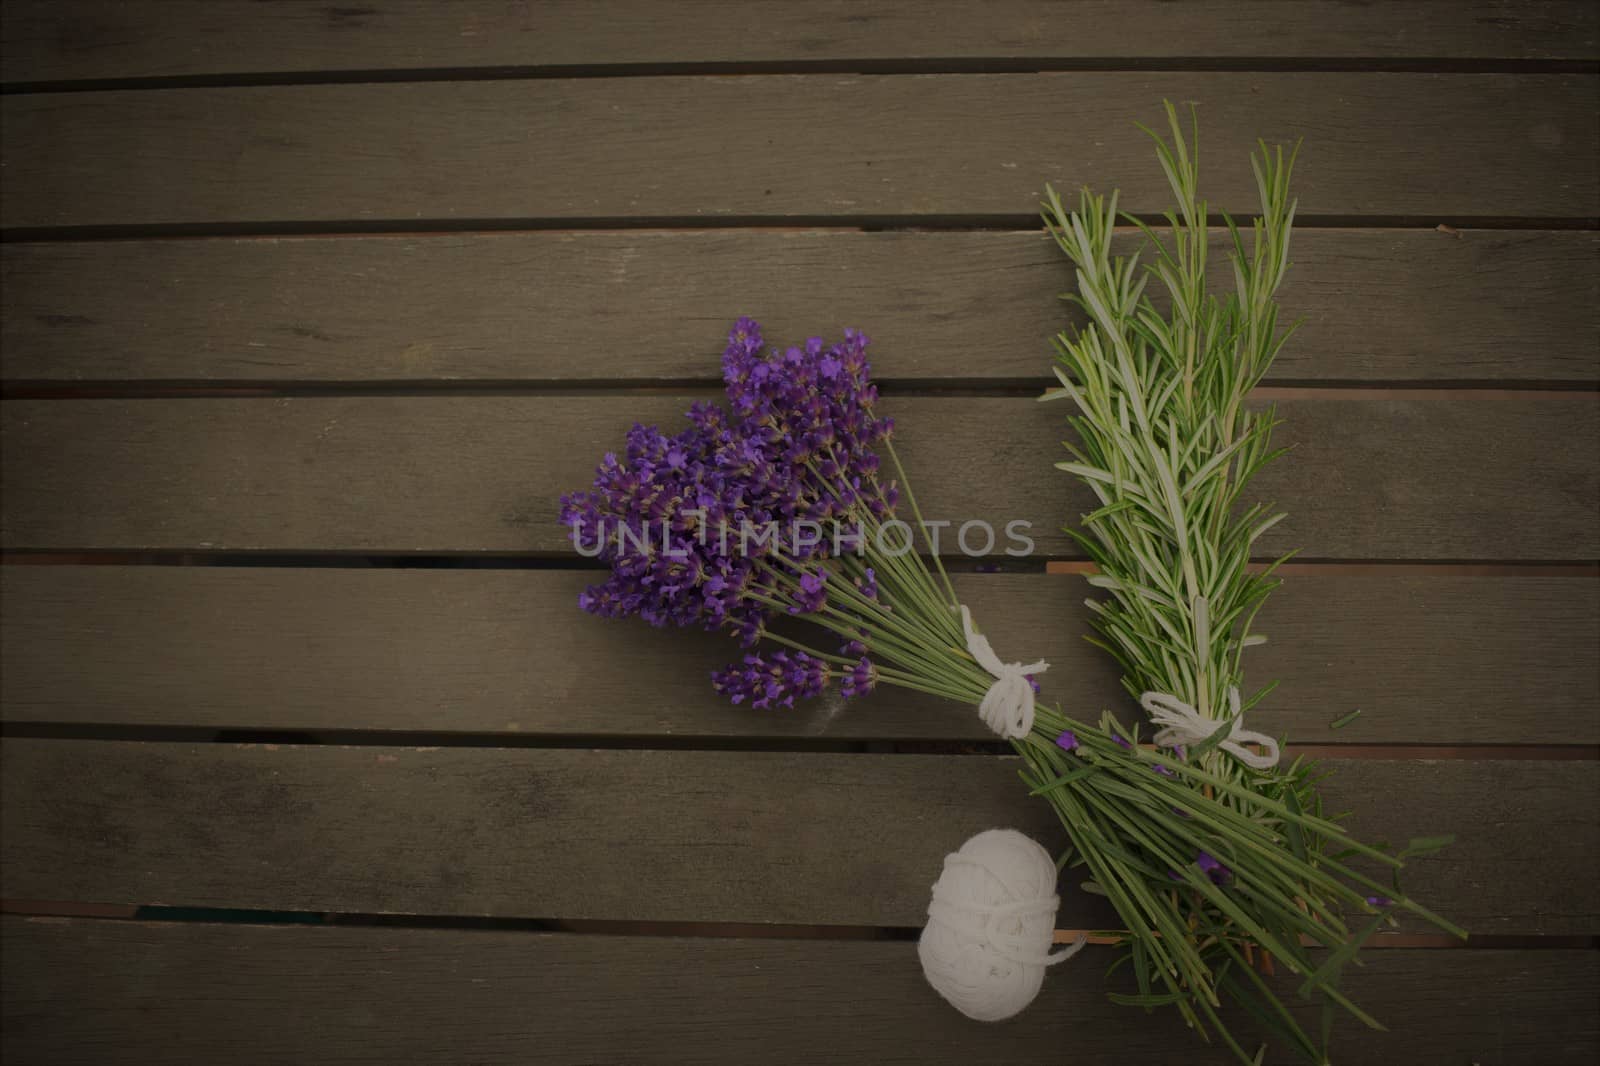 Lavender and Rosemary picked and tied with string.